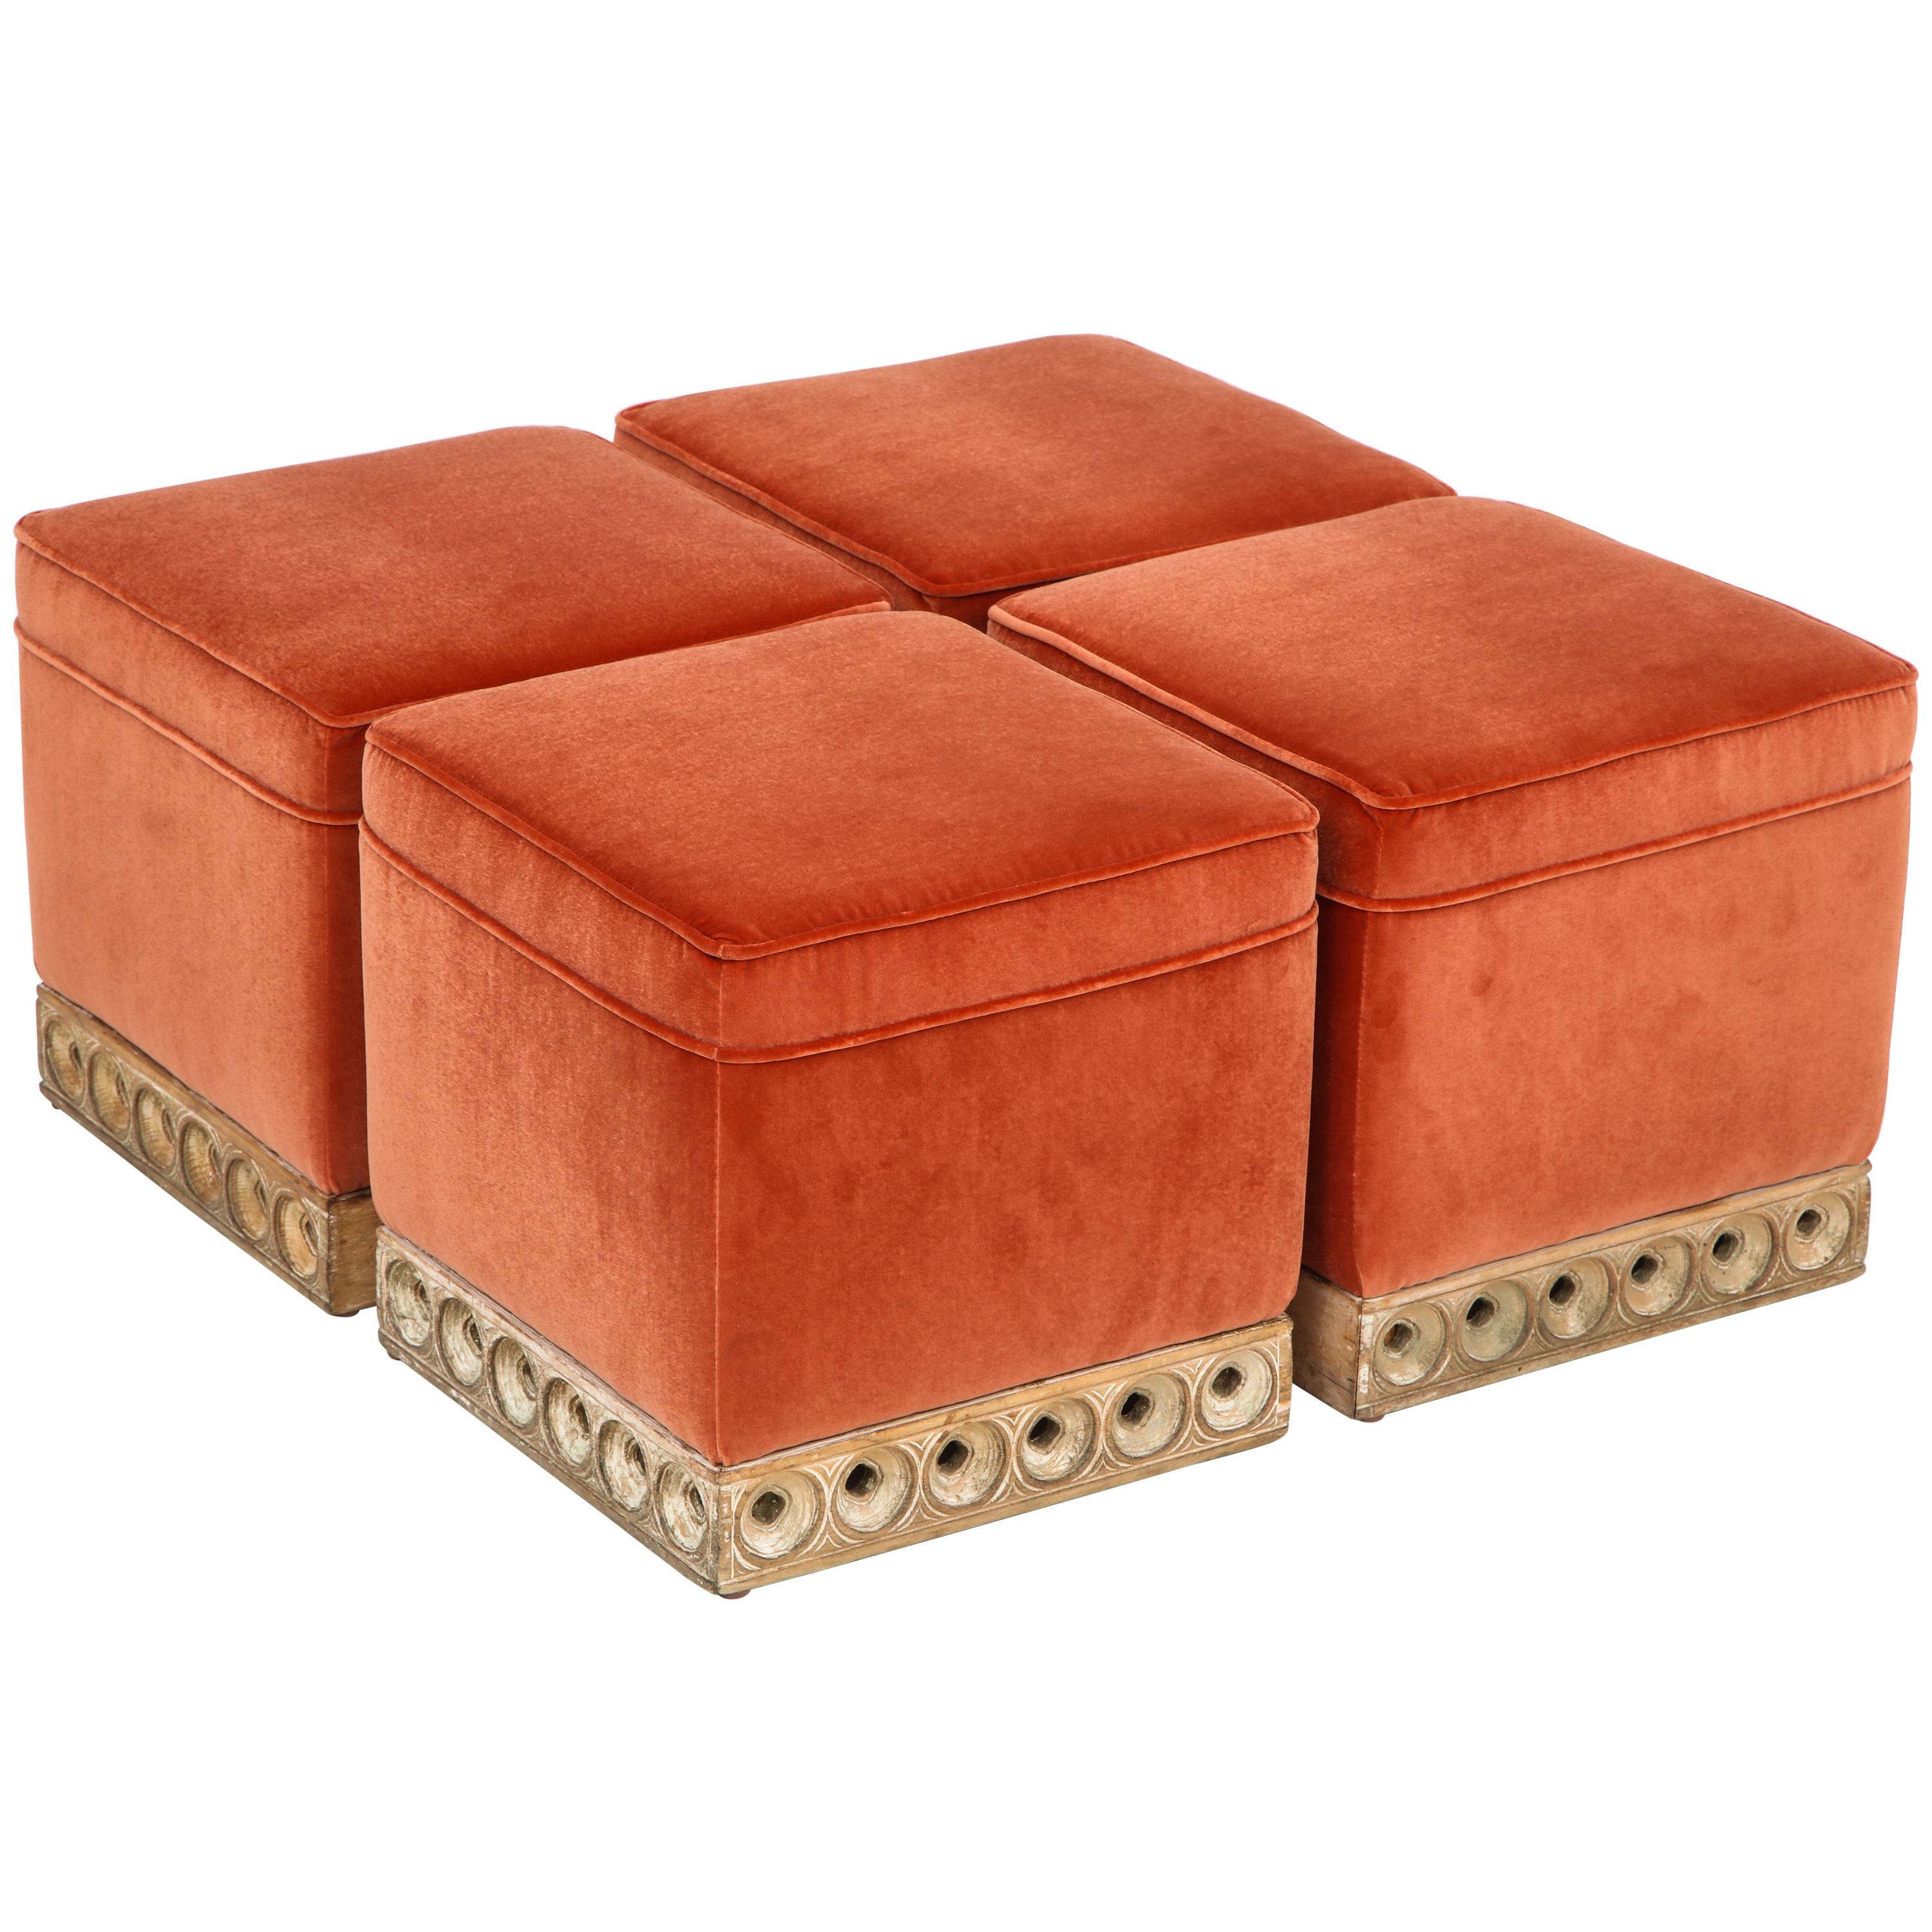 Set of 4 Orange Velvet Poufs or Stools with Wooden Carved Bases, Italy, 1970s